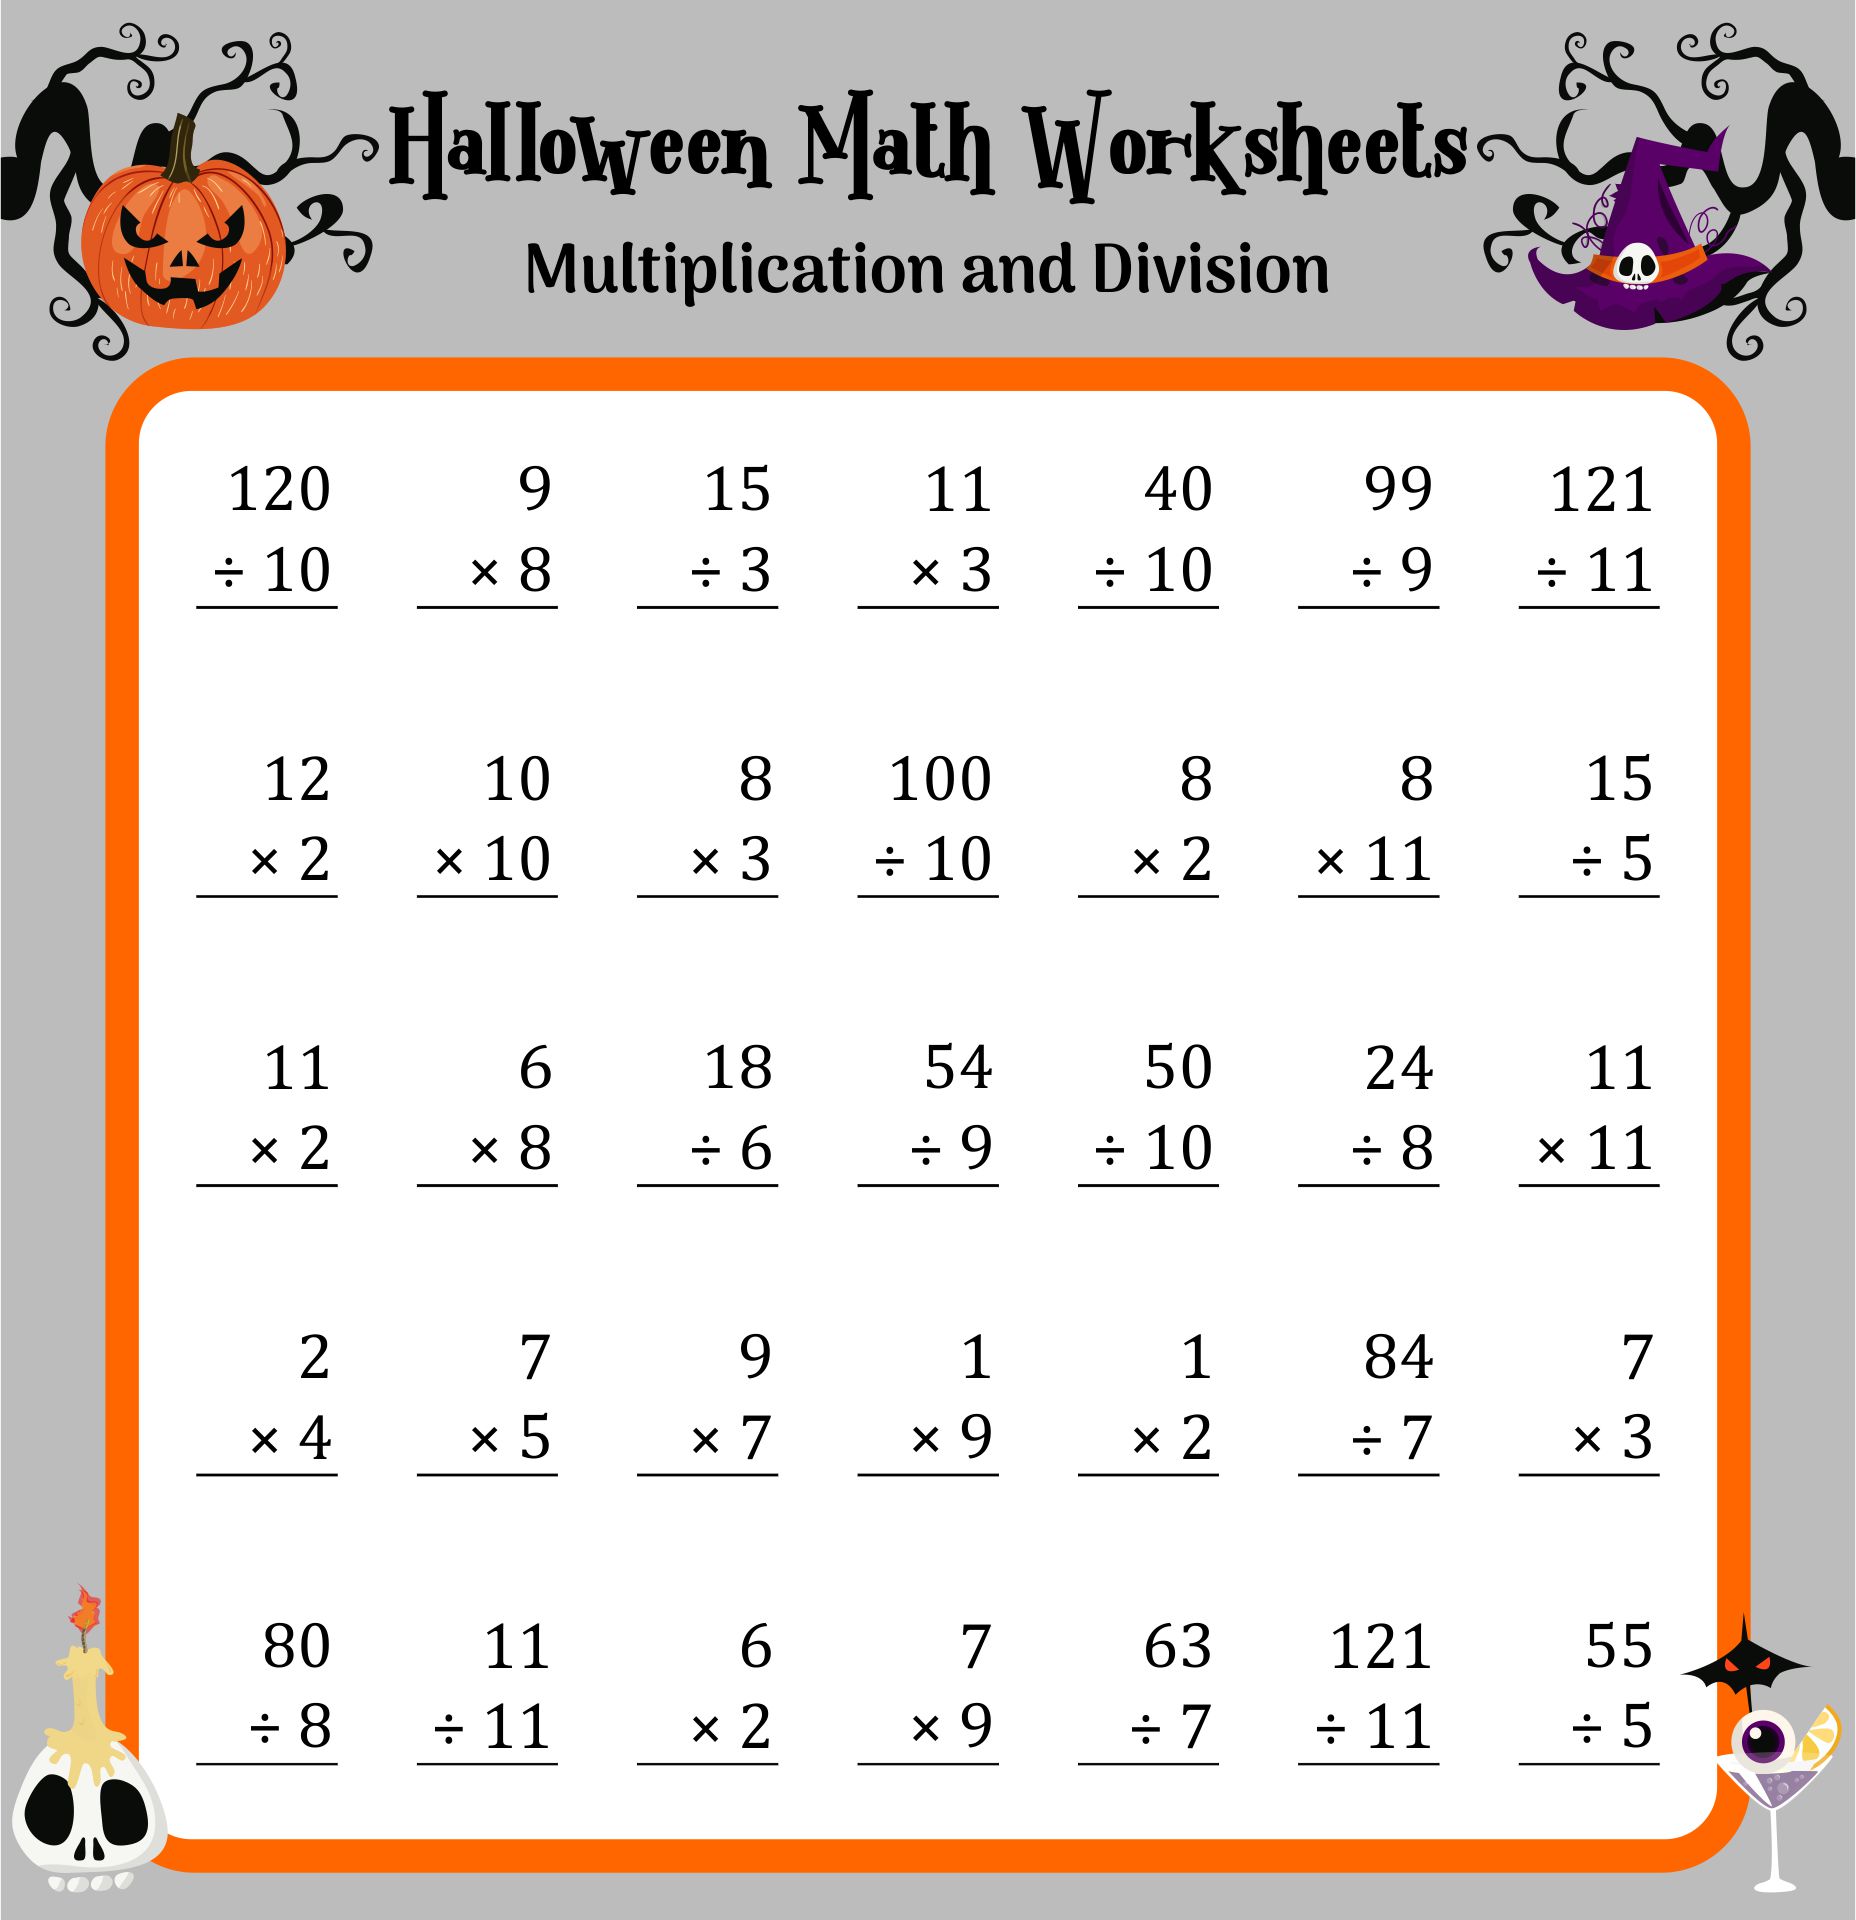 3rd Grade Halloween Math Worksheets Printable Multiplication And Division